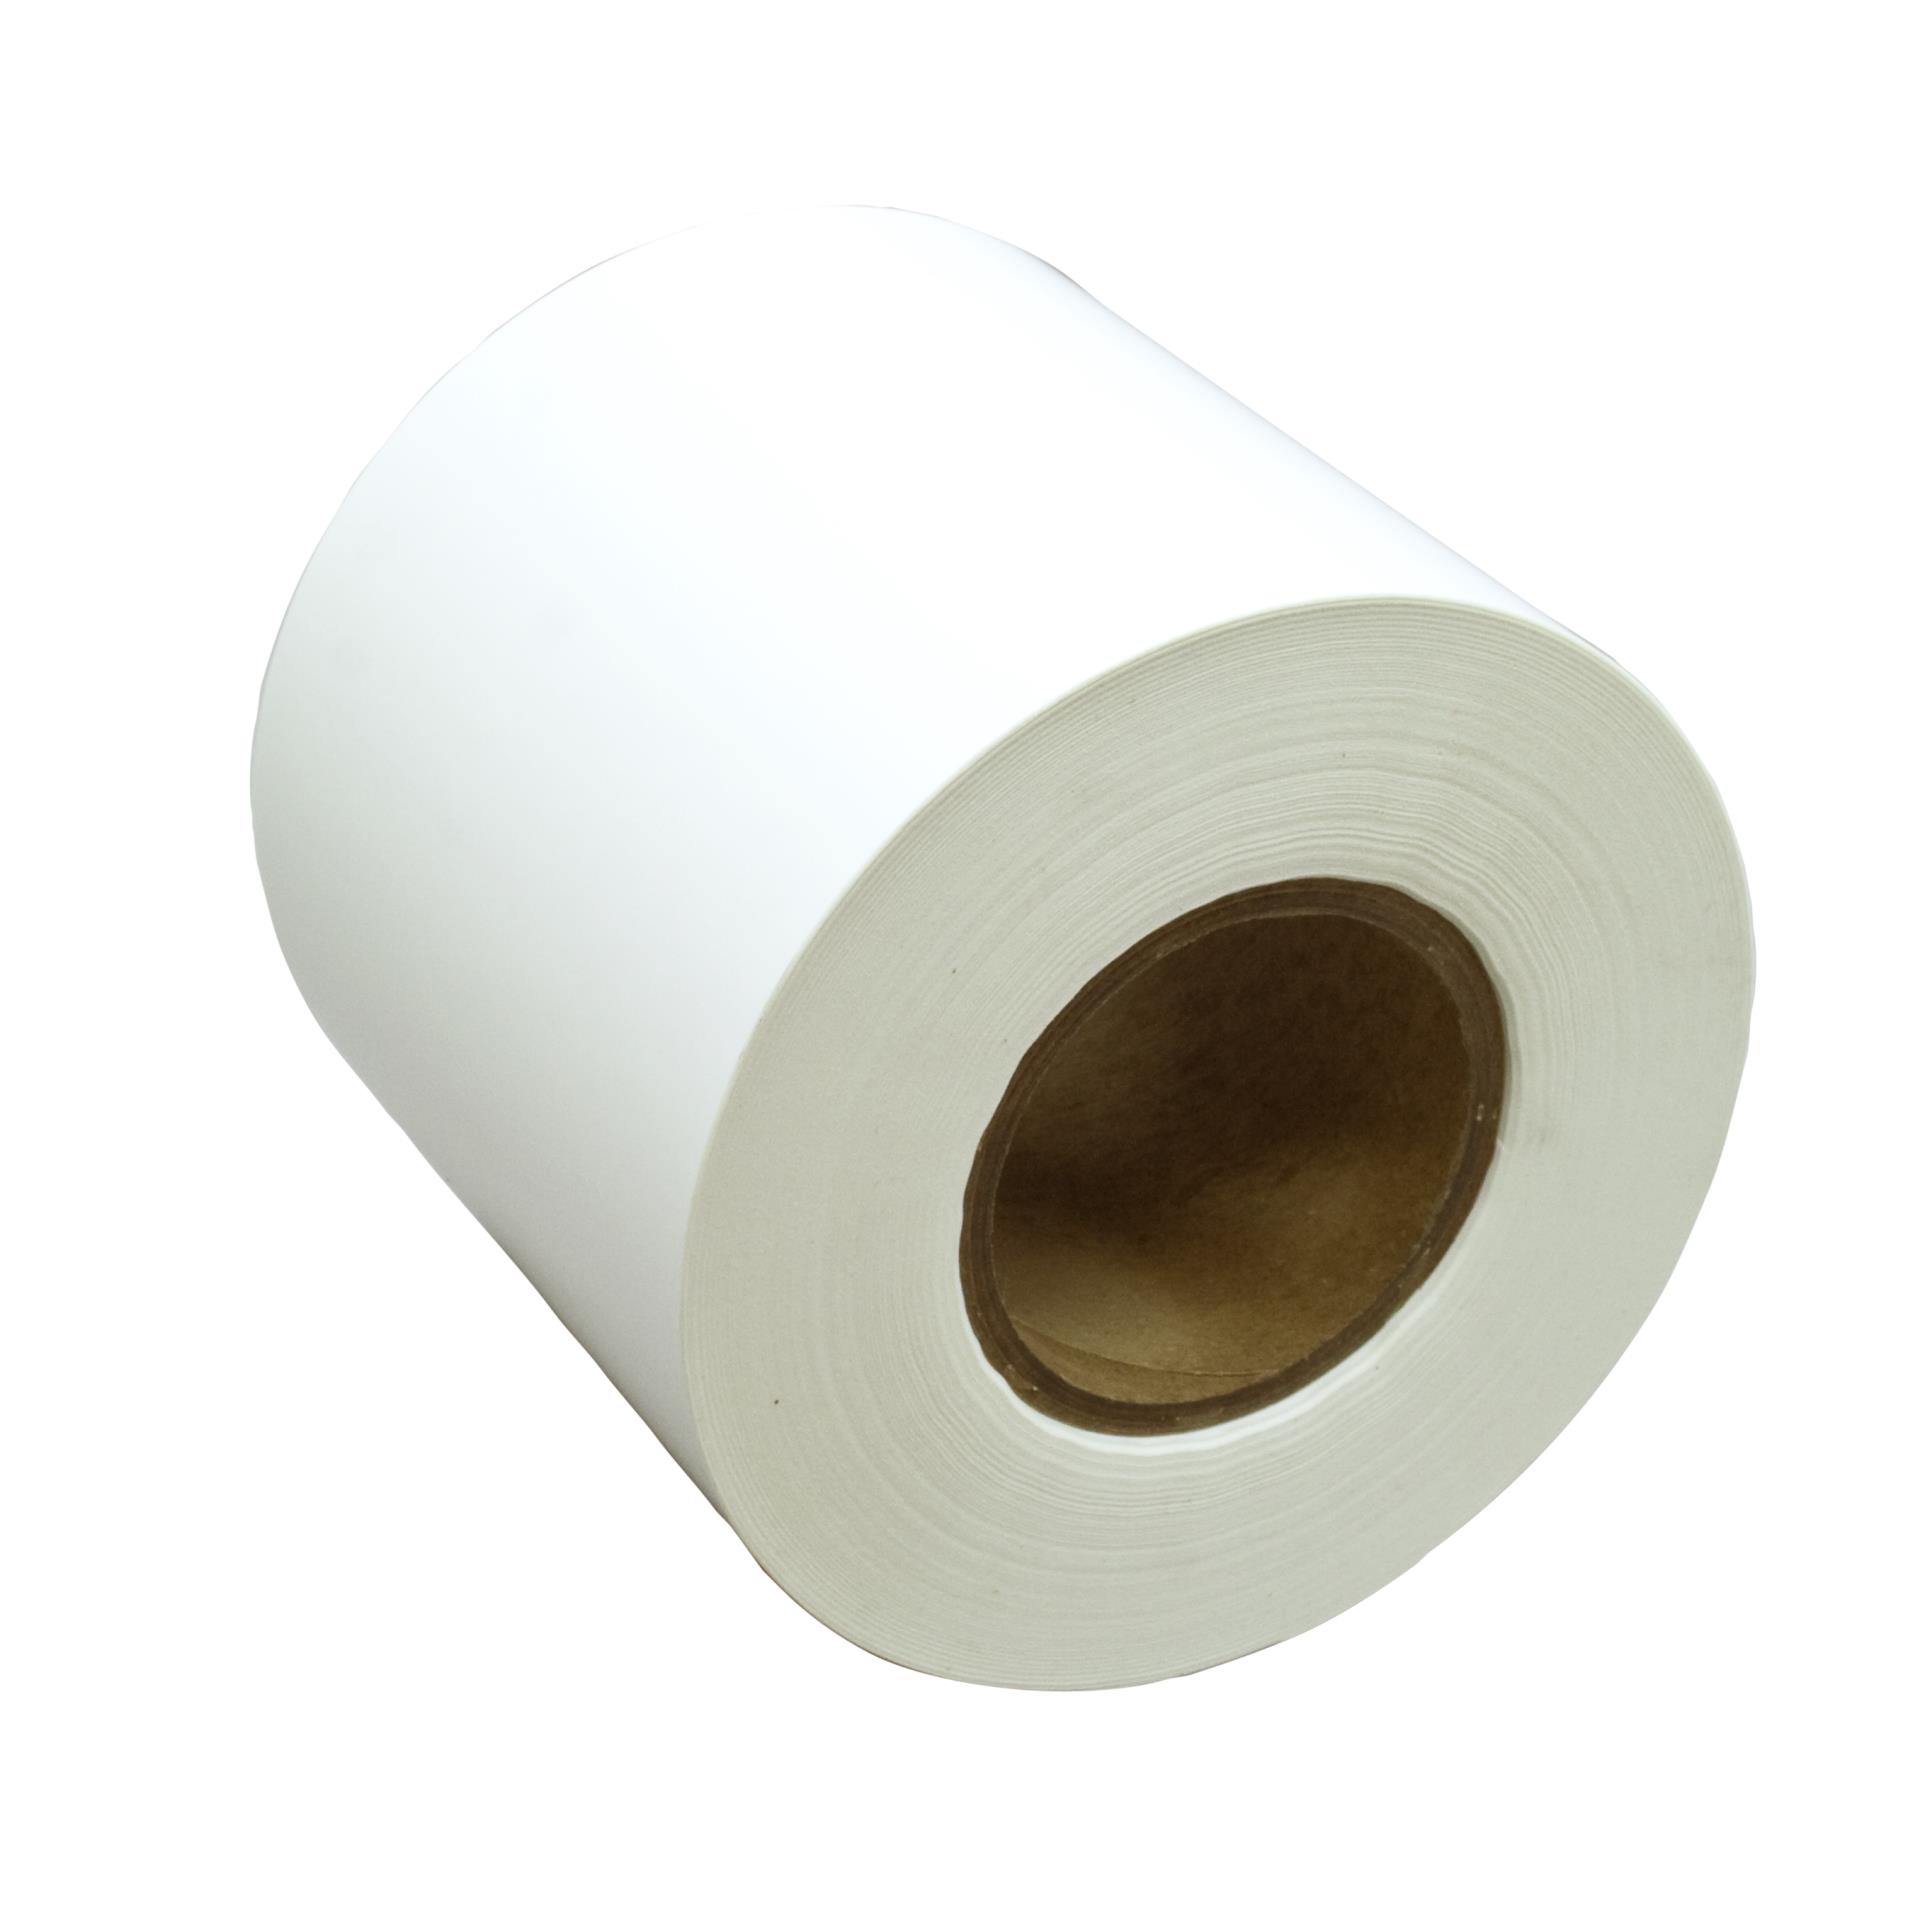 3M Thermal Transfer Label Material 7246, Matte White POLYESTER, 6 in x1668 ft, 1 Roll per Case